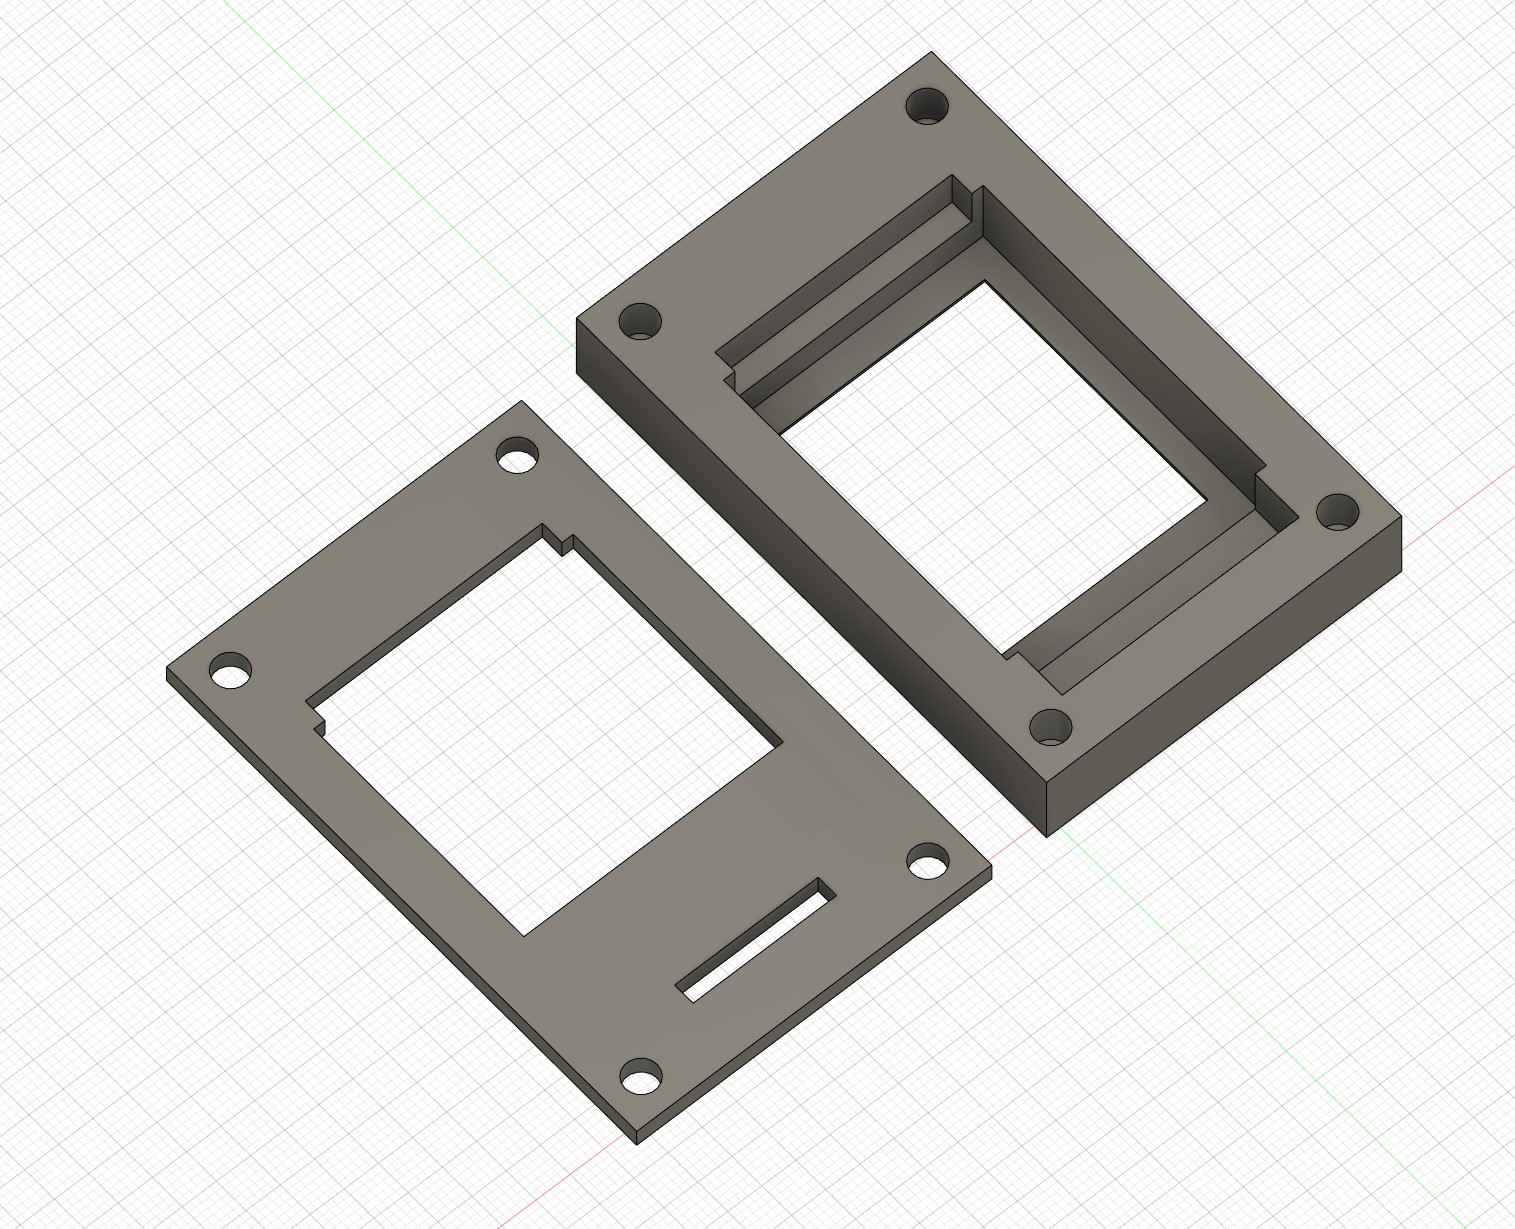 Bezel and template for 1.8" TFT ST7735